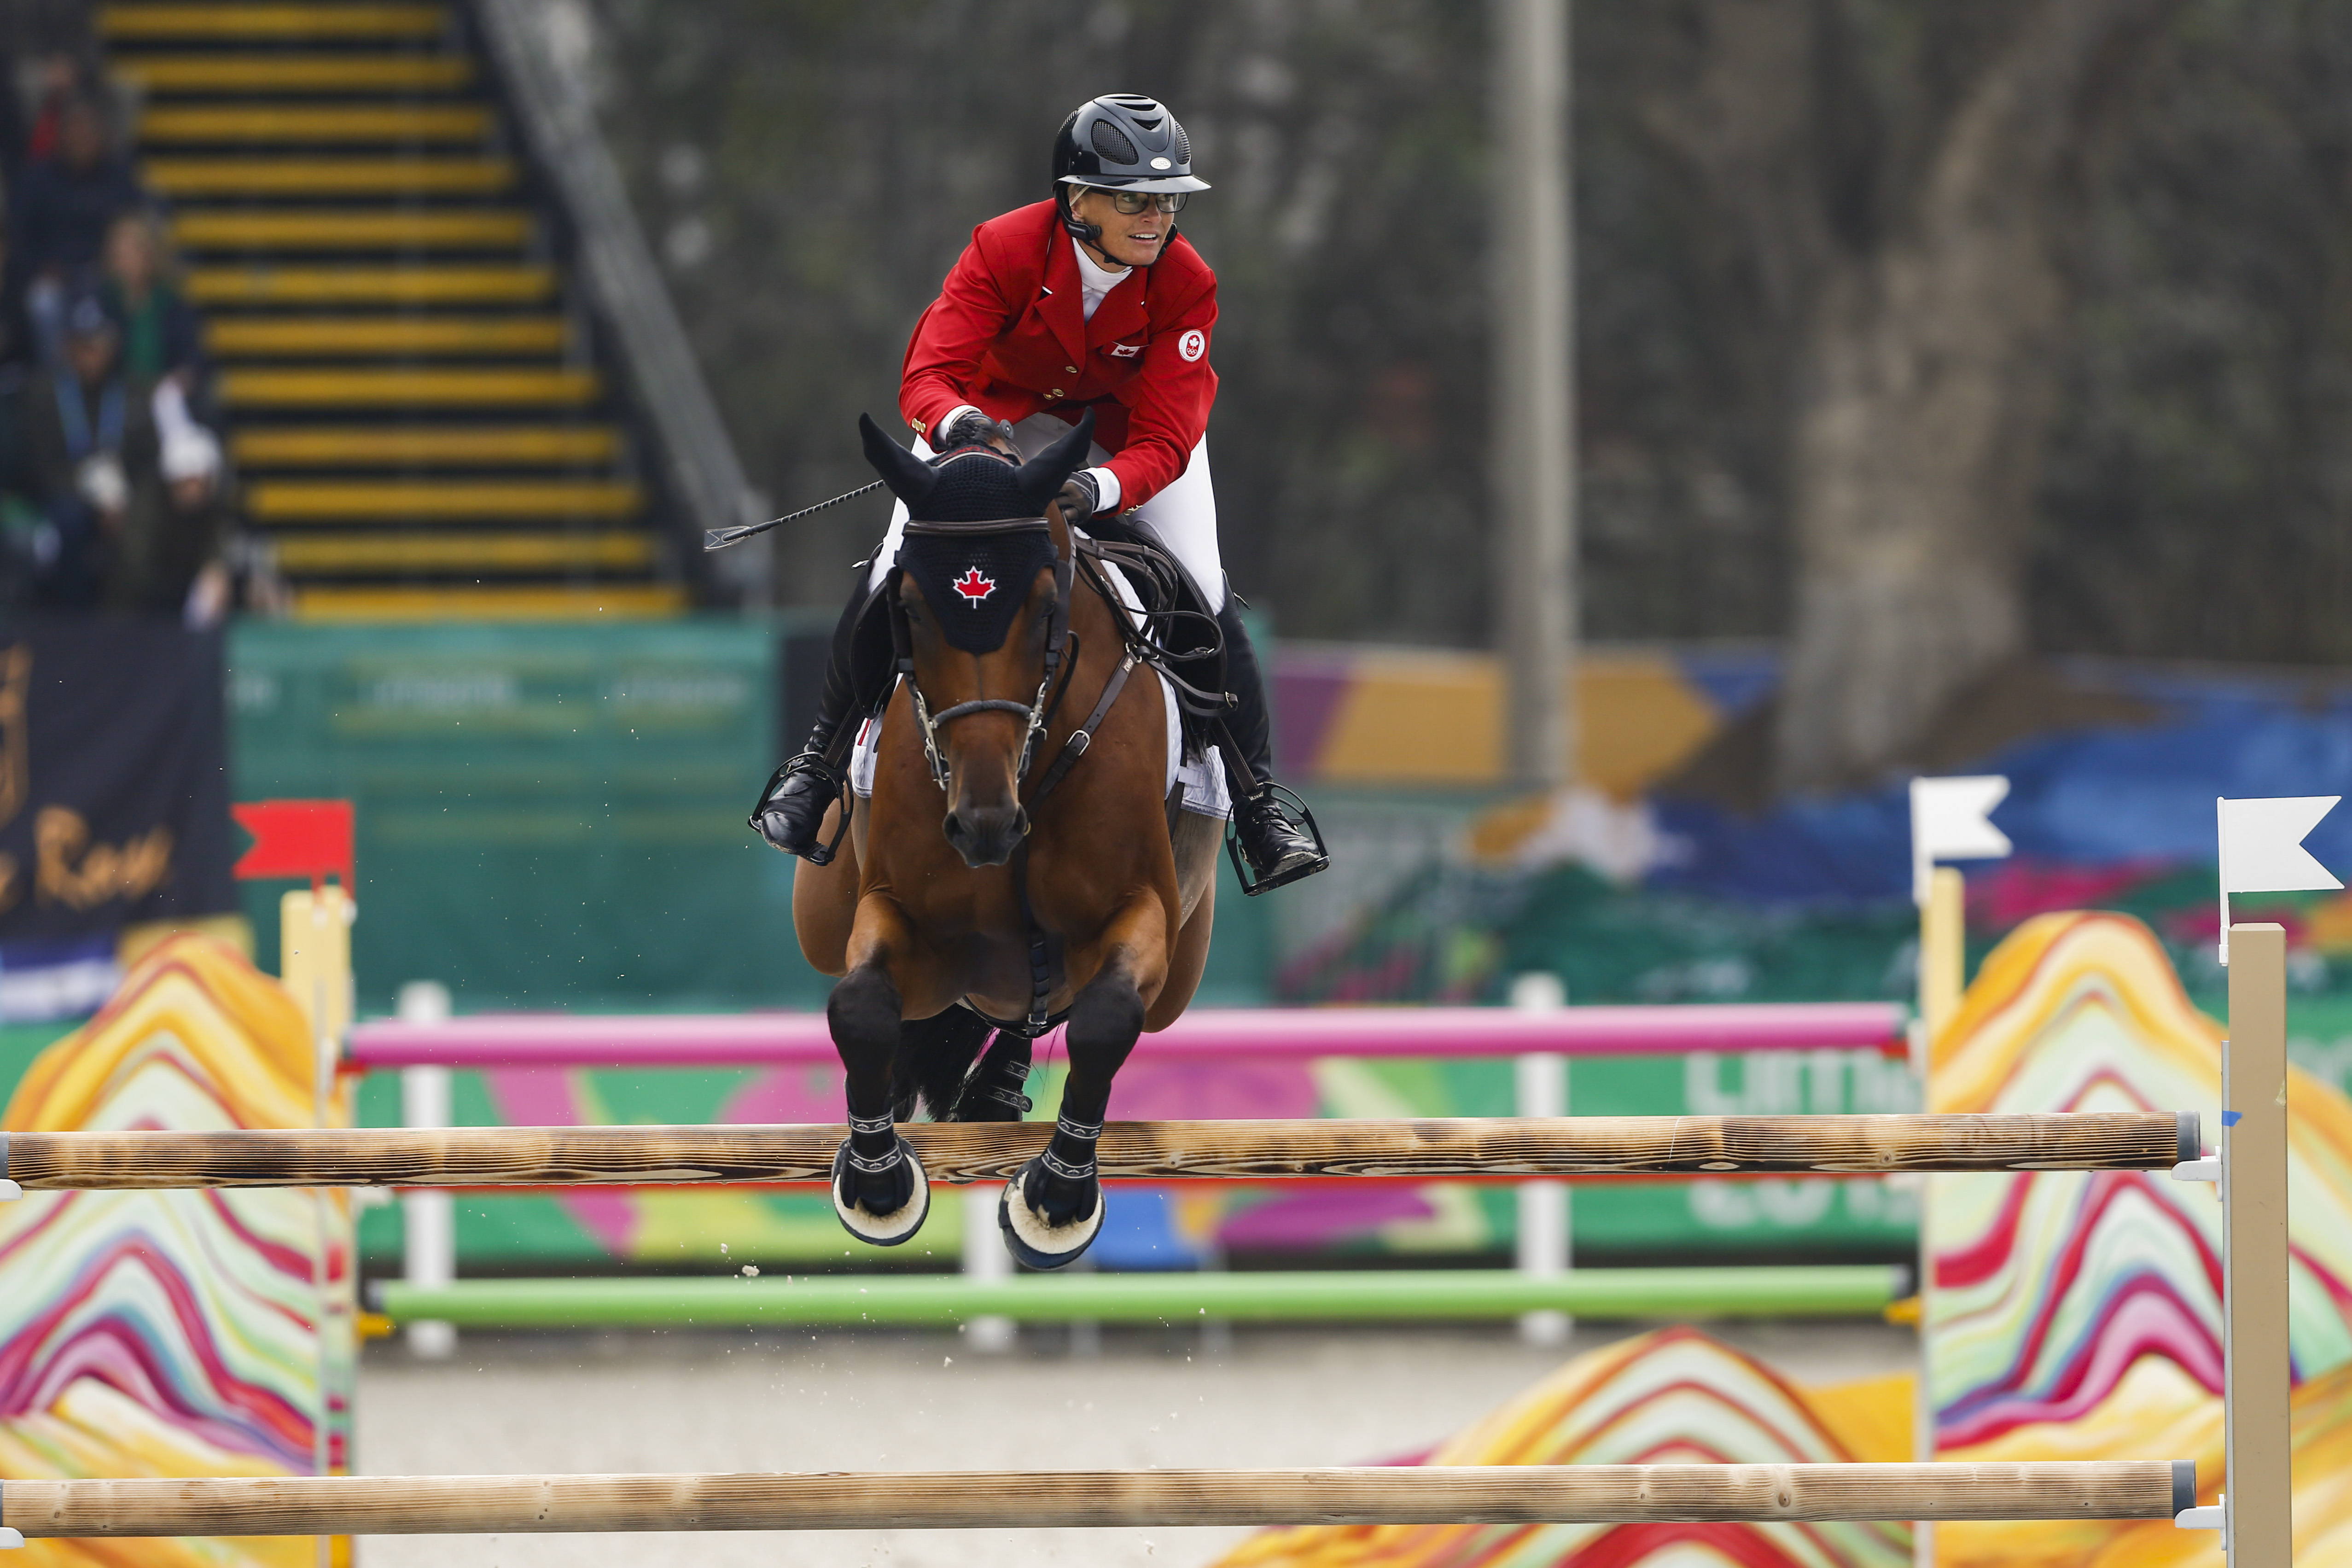 horse and rider jump over a jump